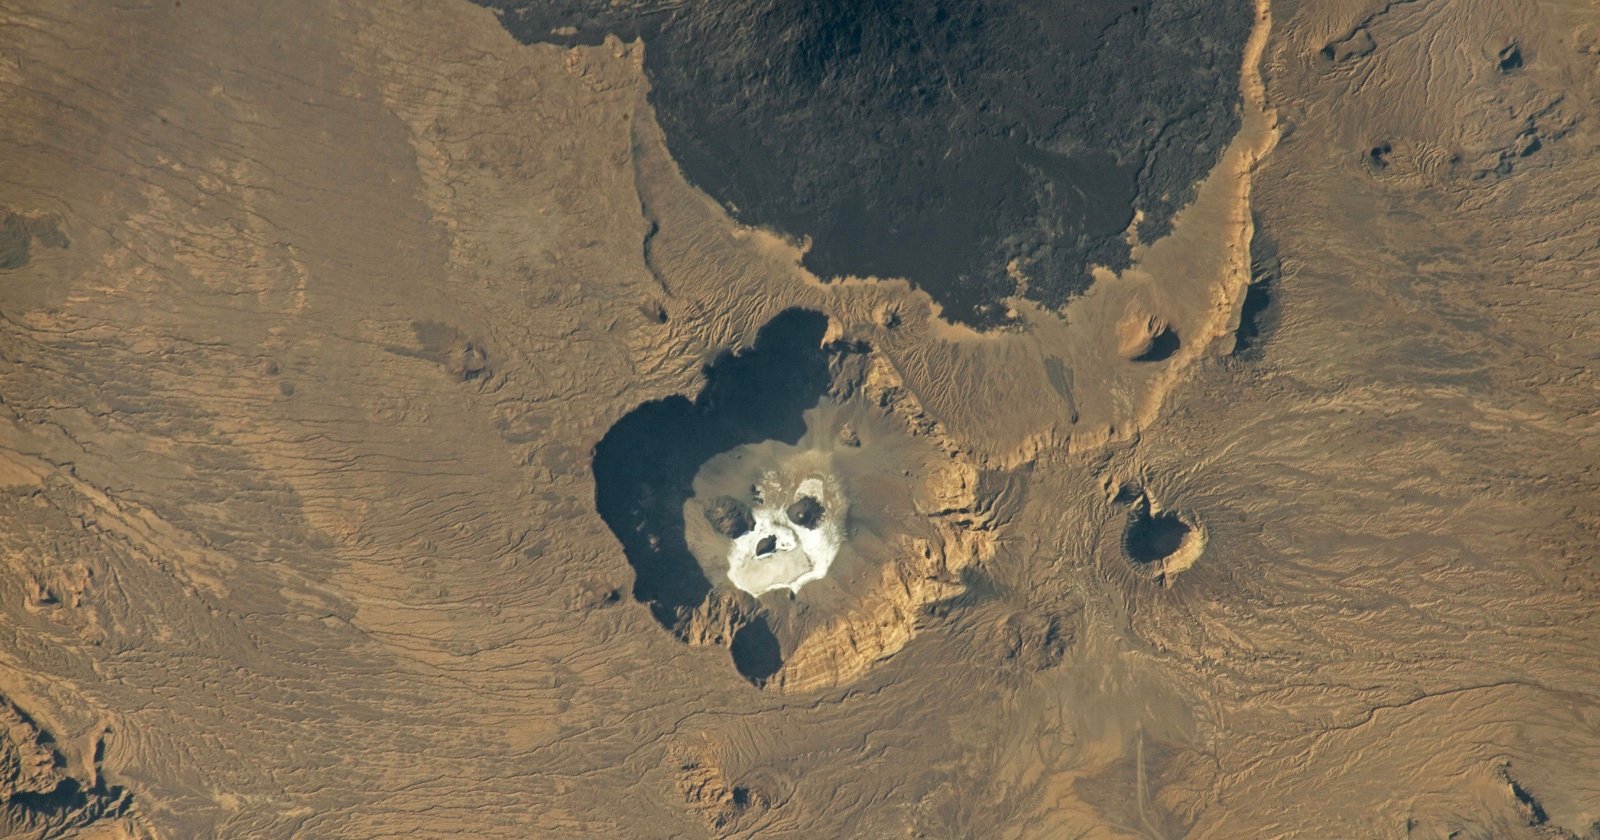 Astronaut Captures Eerie Image of Giant Skull Staring Back From Earth